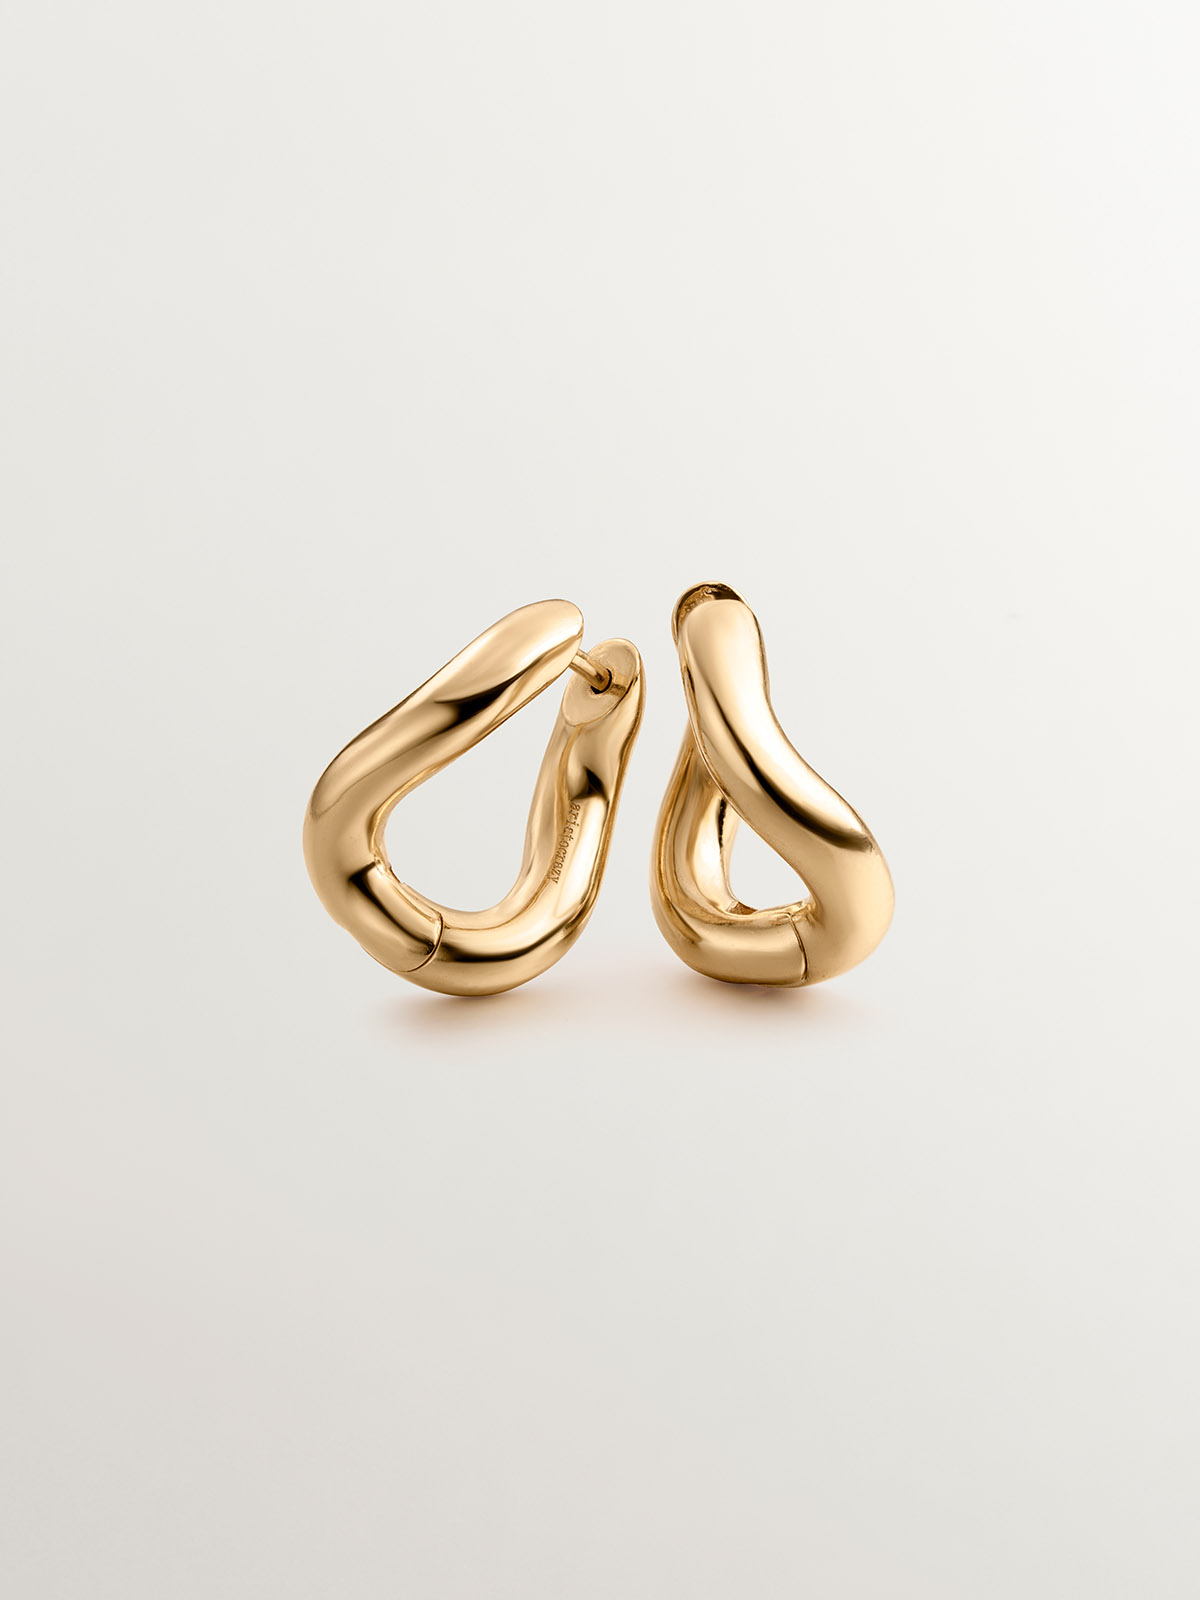 Medium thick 925 silver hoop earrings bathed in 18K yellow gold with a wavy shape.